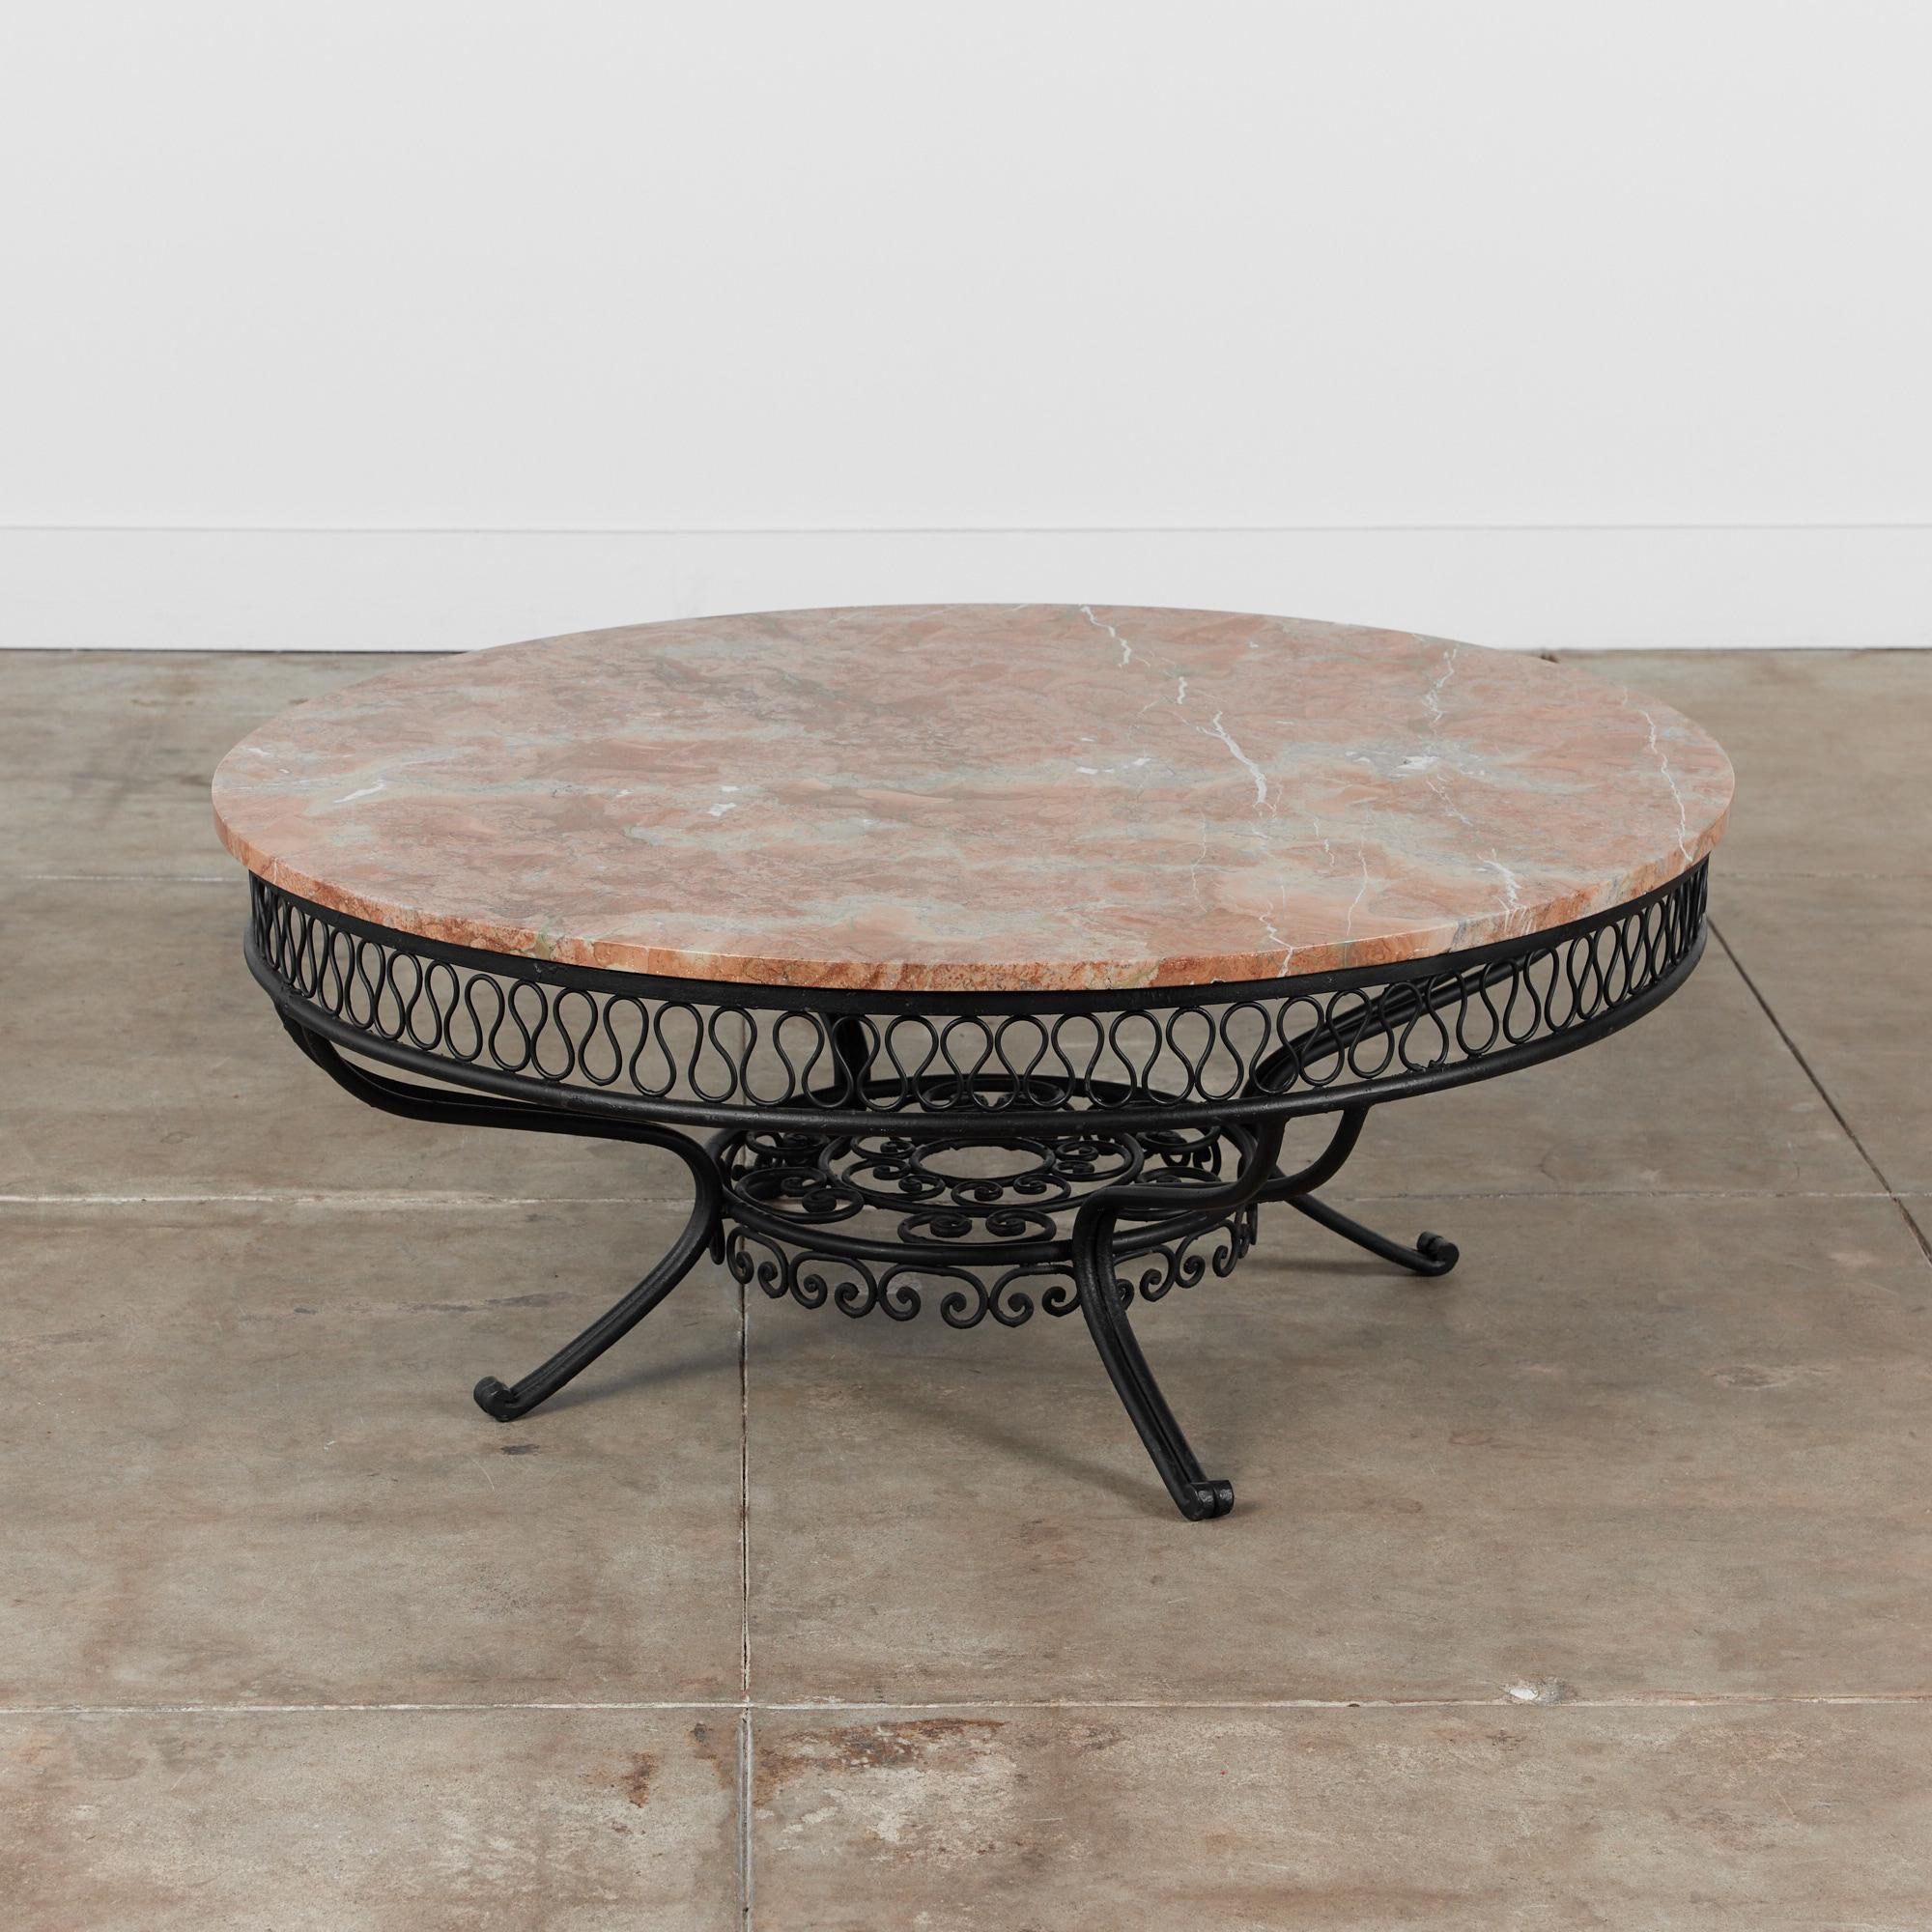 Coffee table in the style of Maurizio Tempestini for John Salterini, USA, circa 1950s. This round table features Tempestini's ribbon style detailing under the base of the table top. The table has been newly powdered coated in a black satin finish